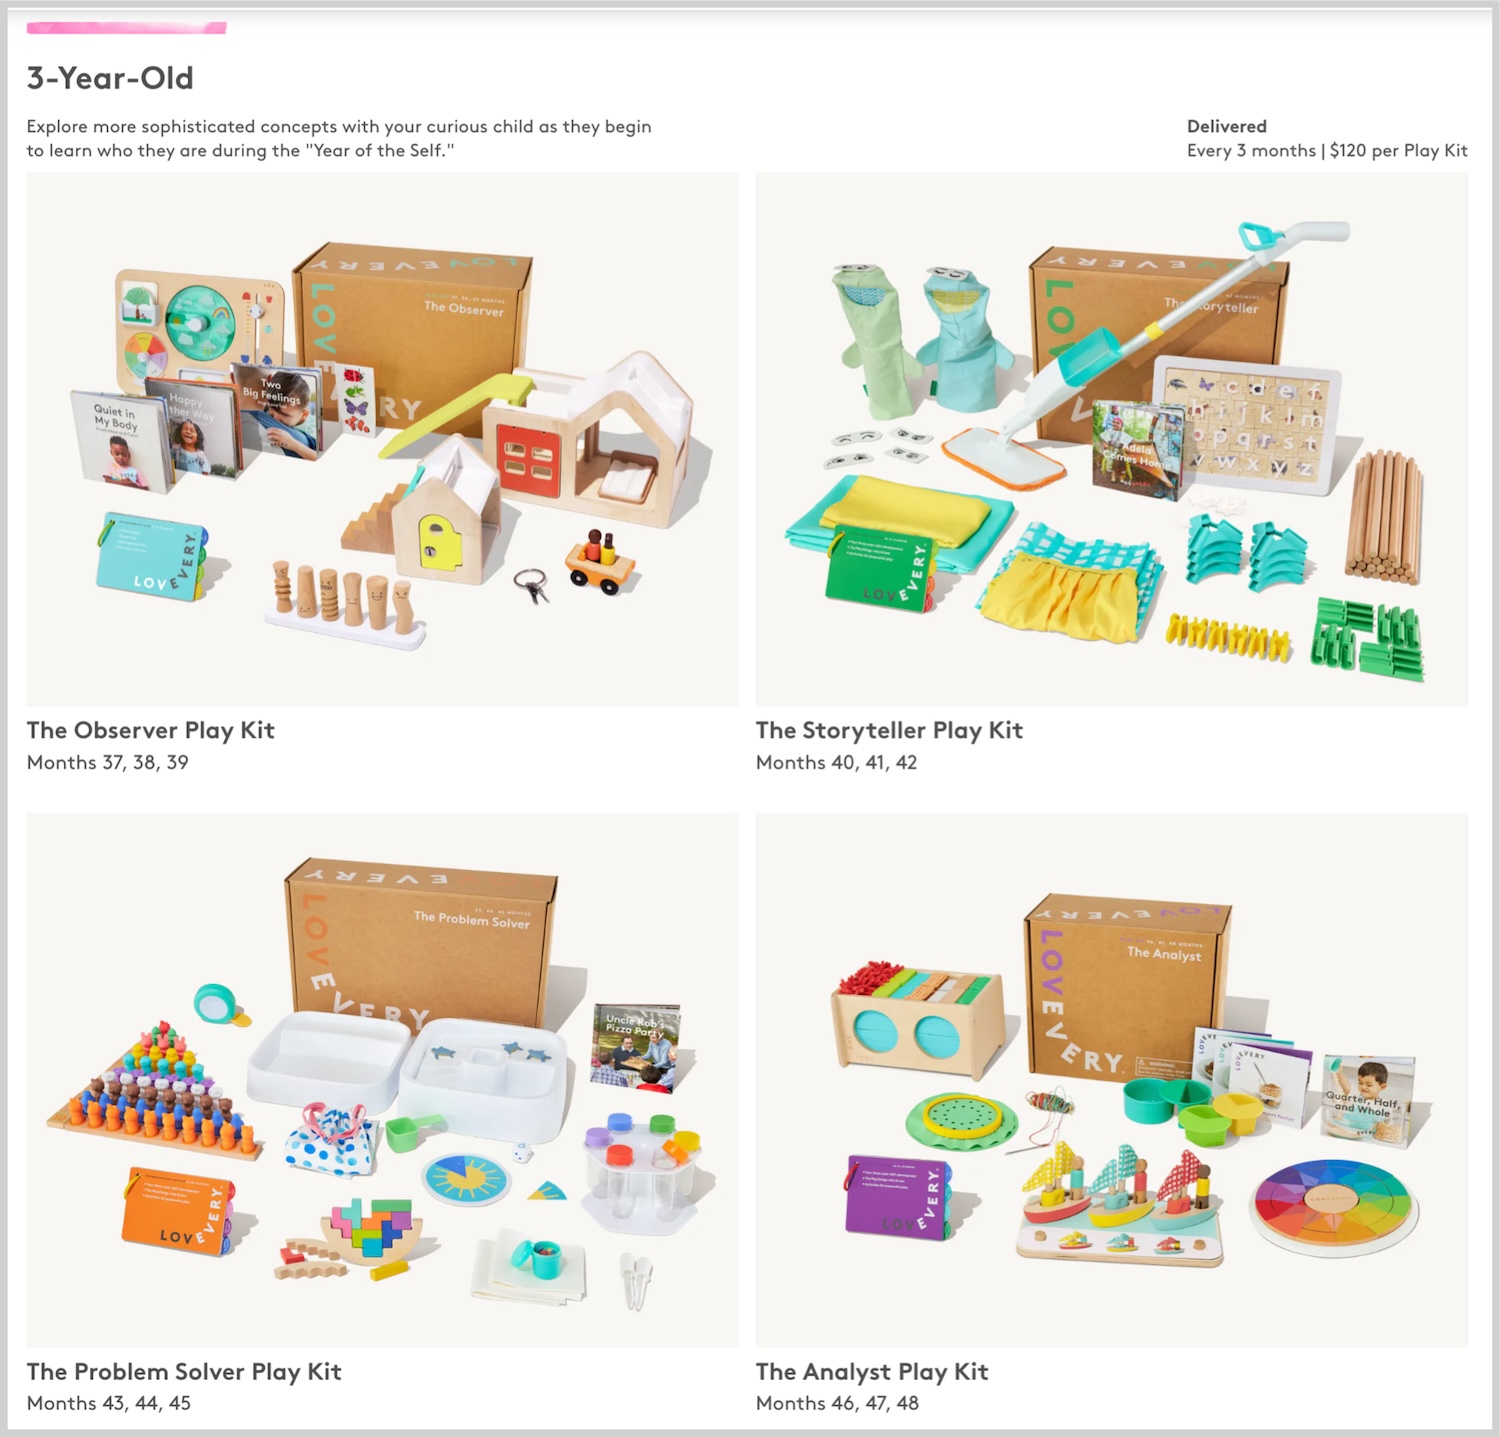 lovevery reviews play kits for 3 year olds